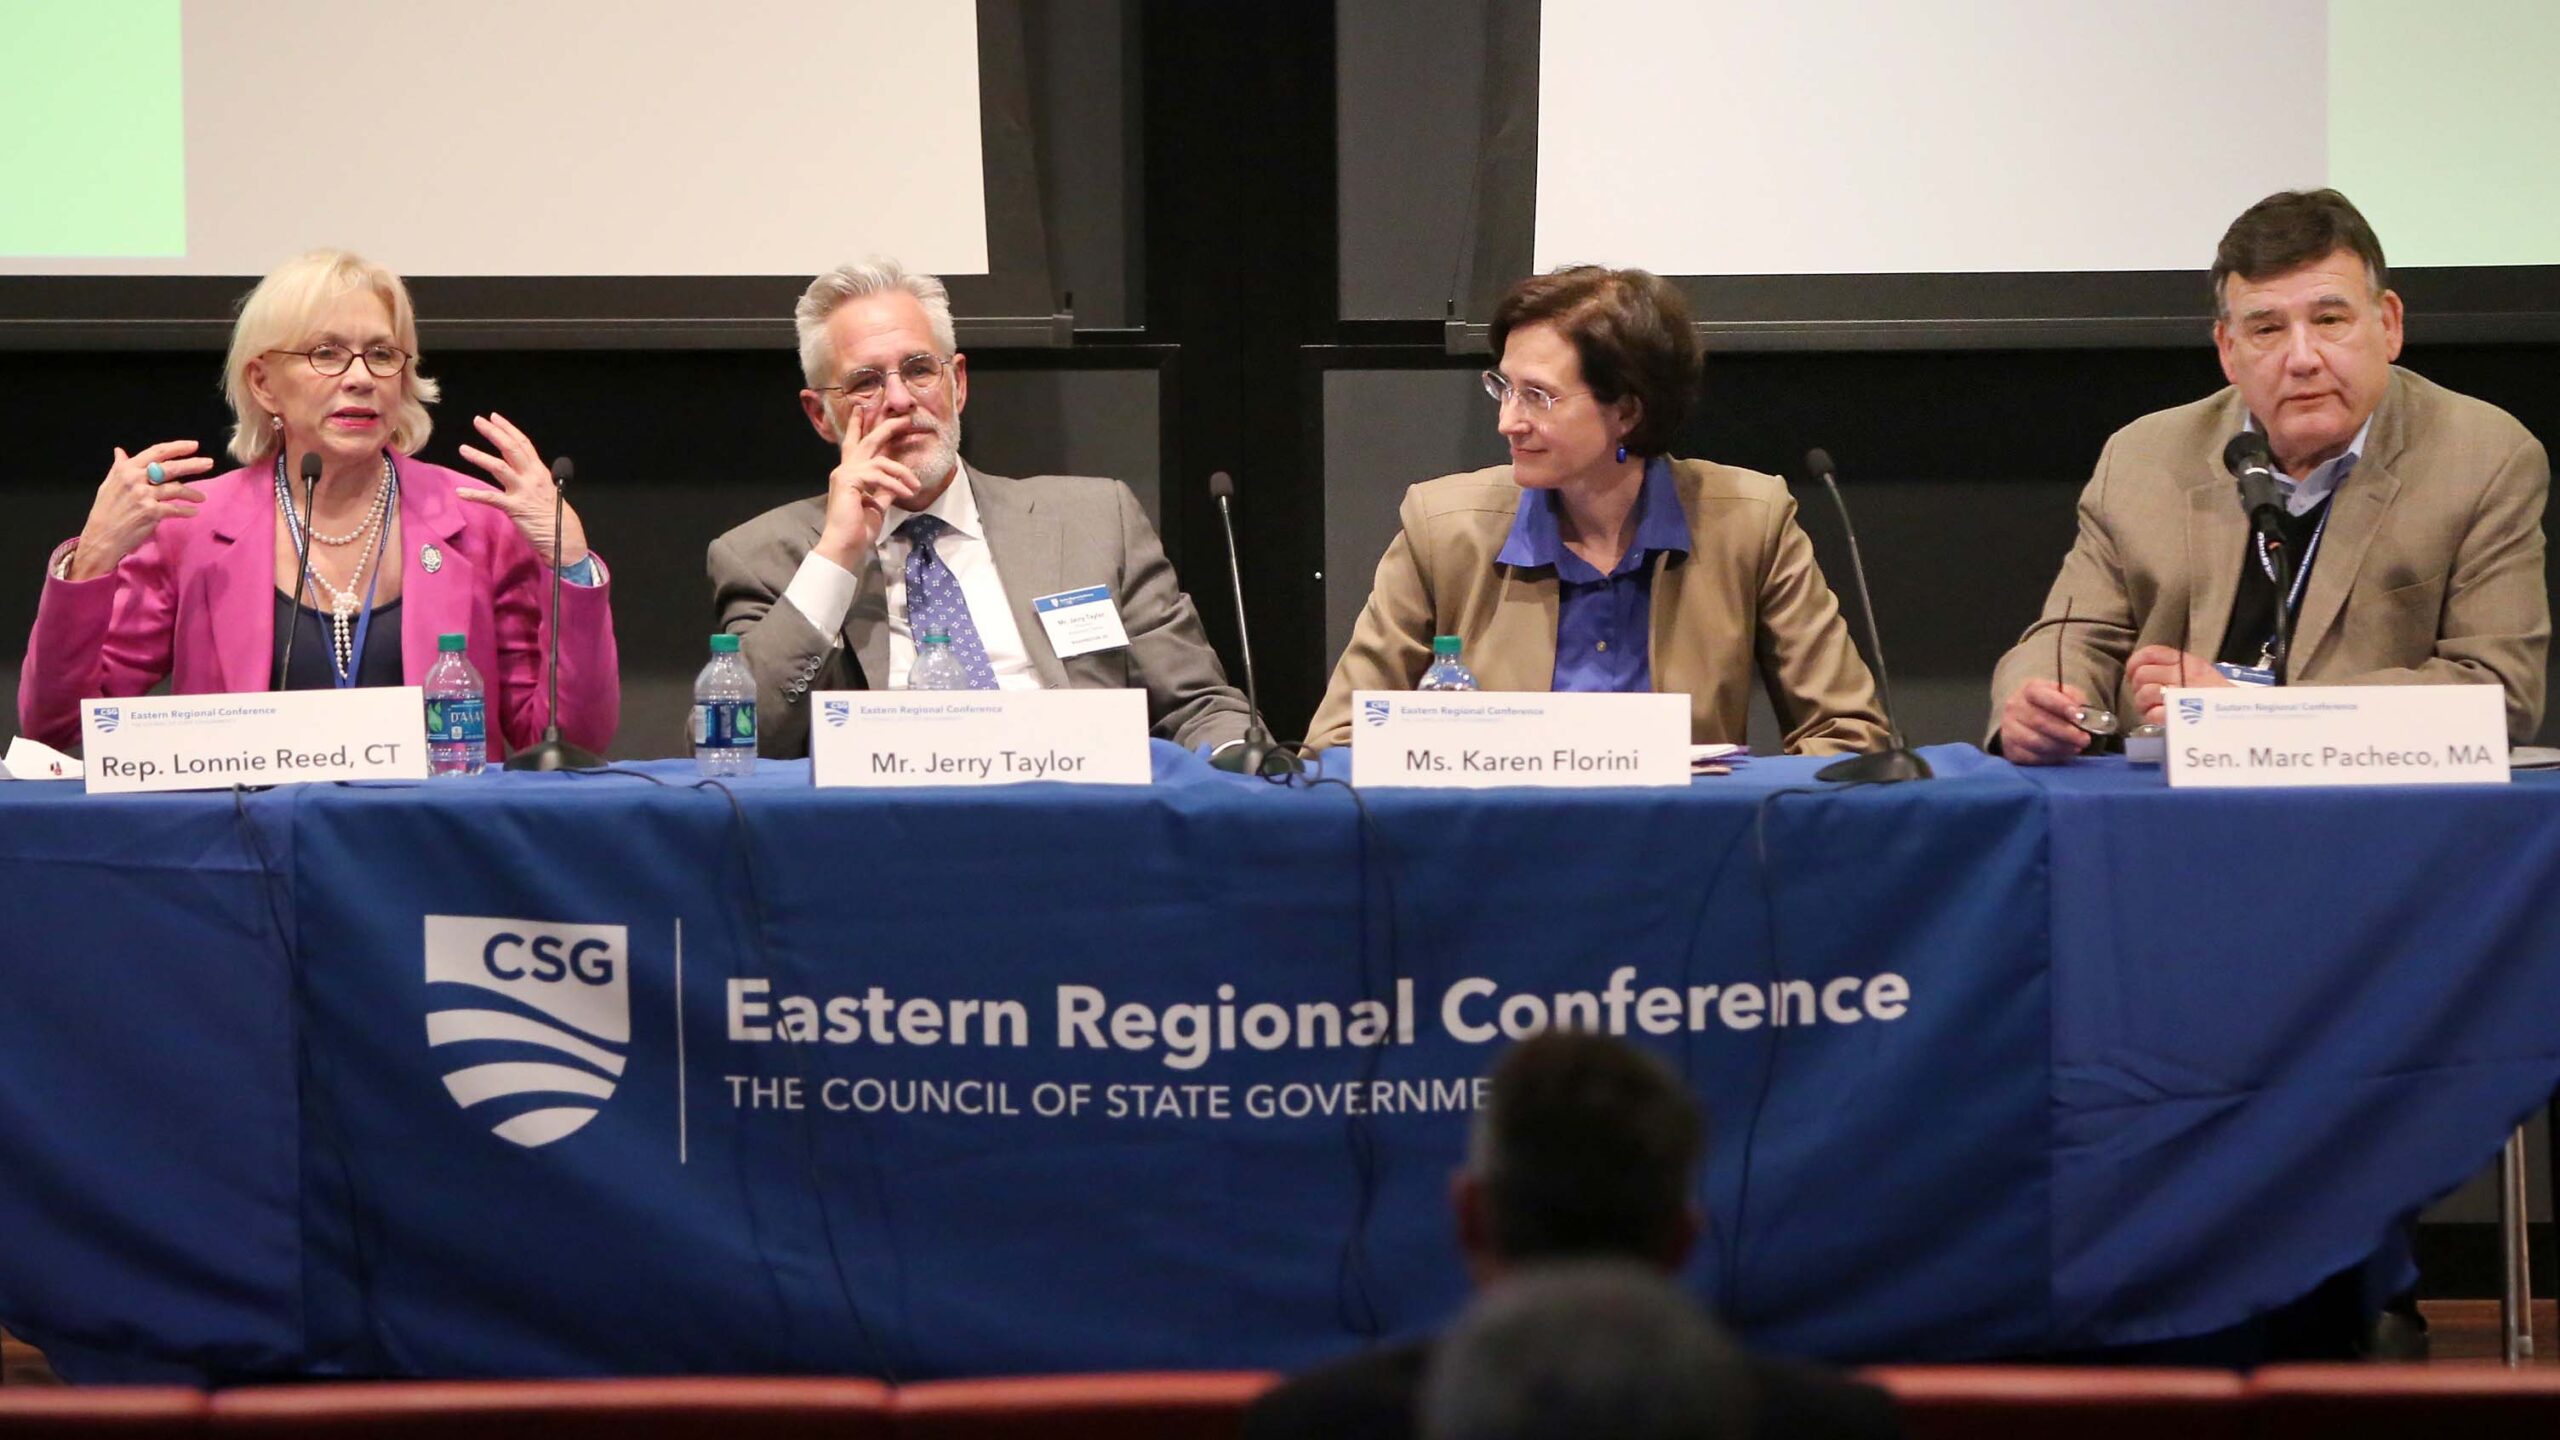 Four panelists speak at a conference